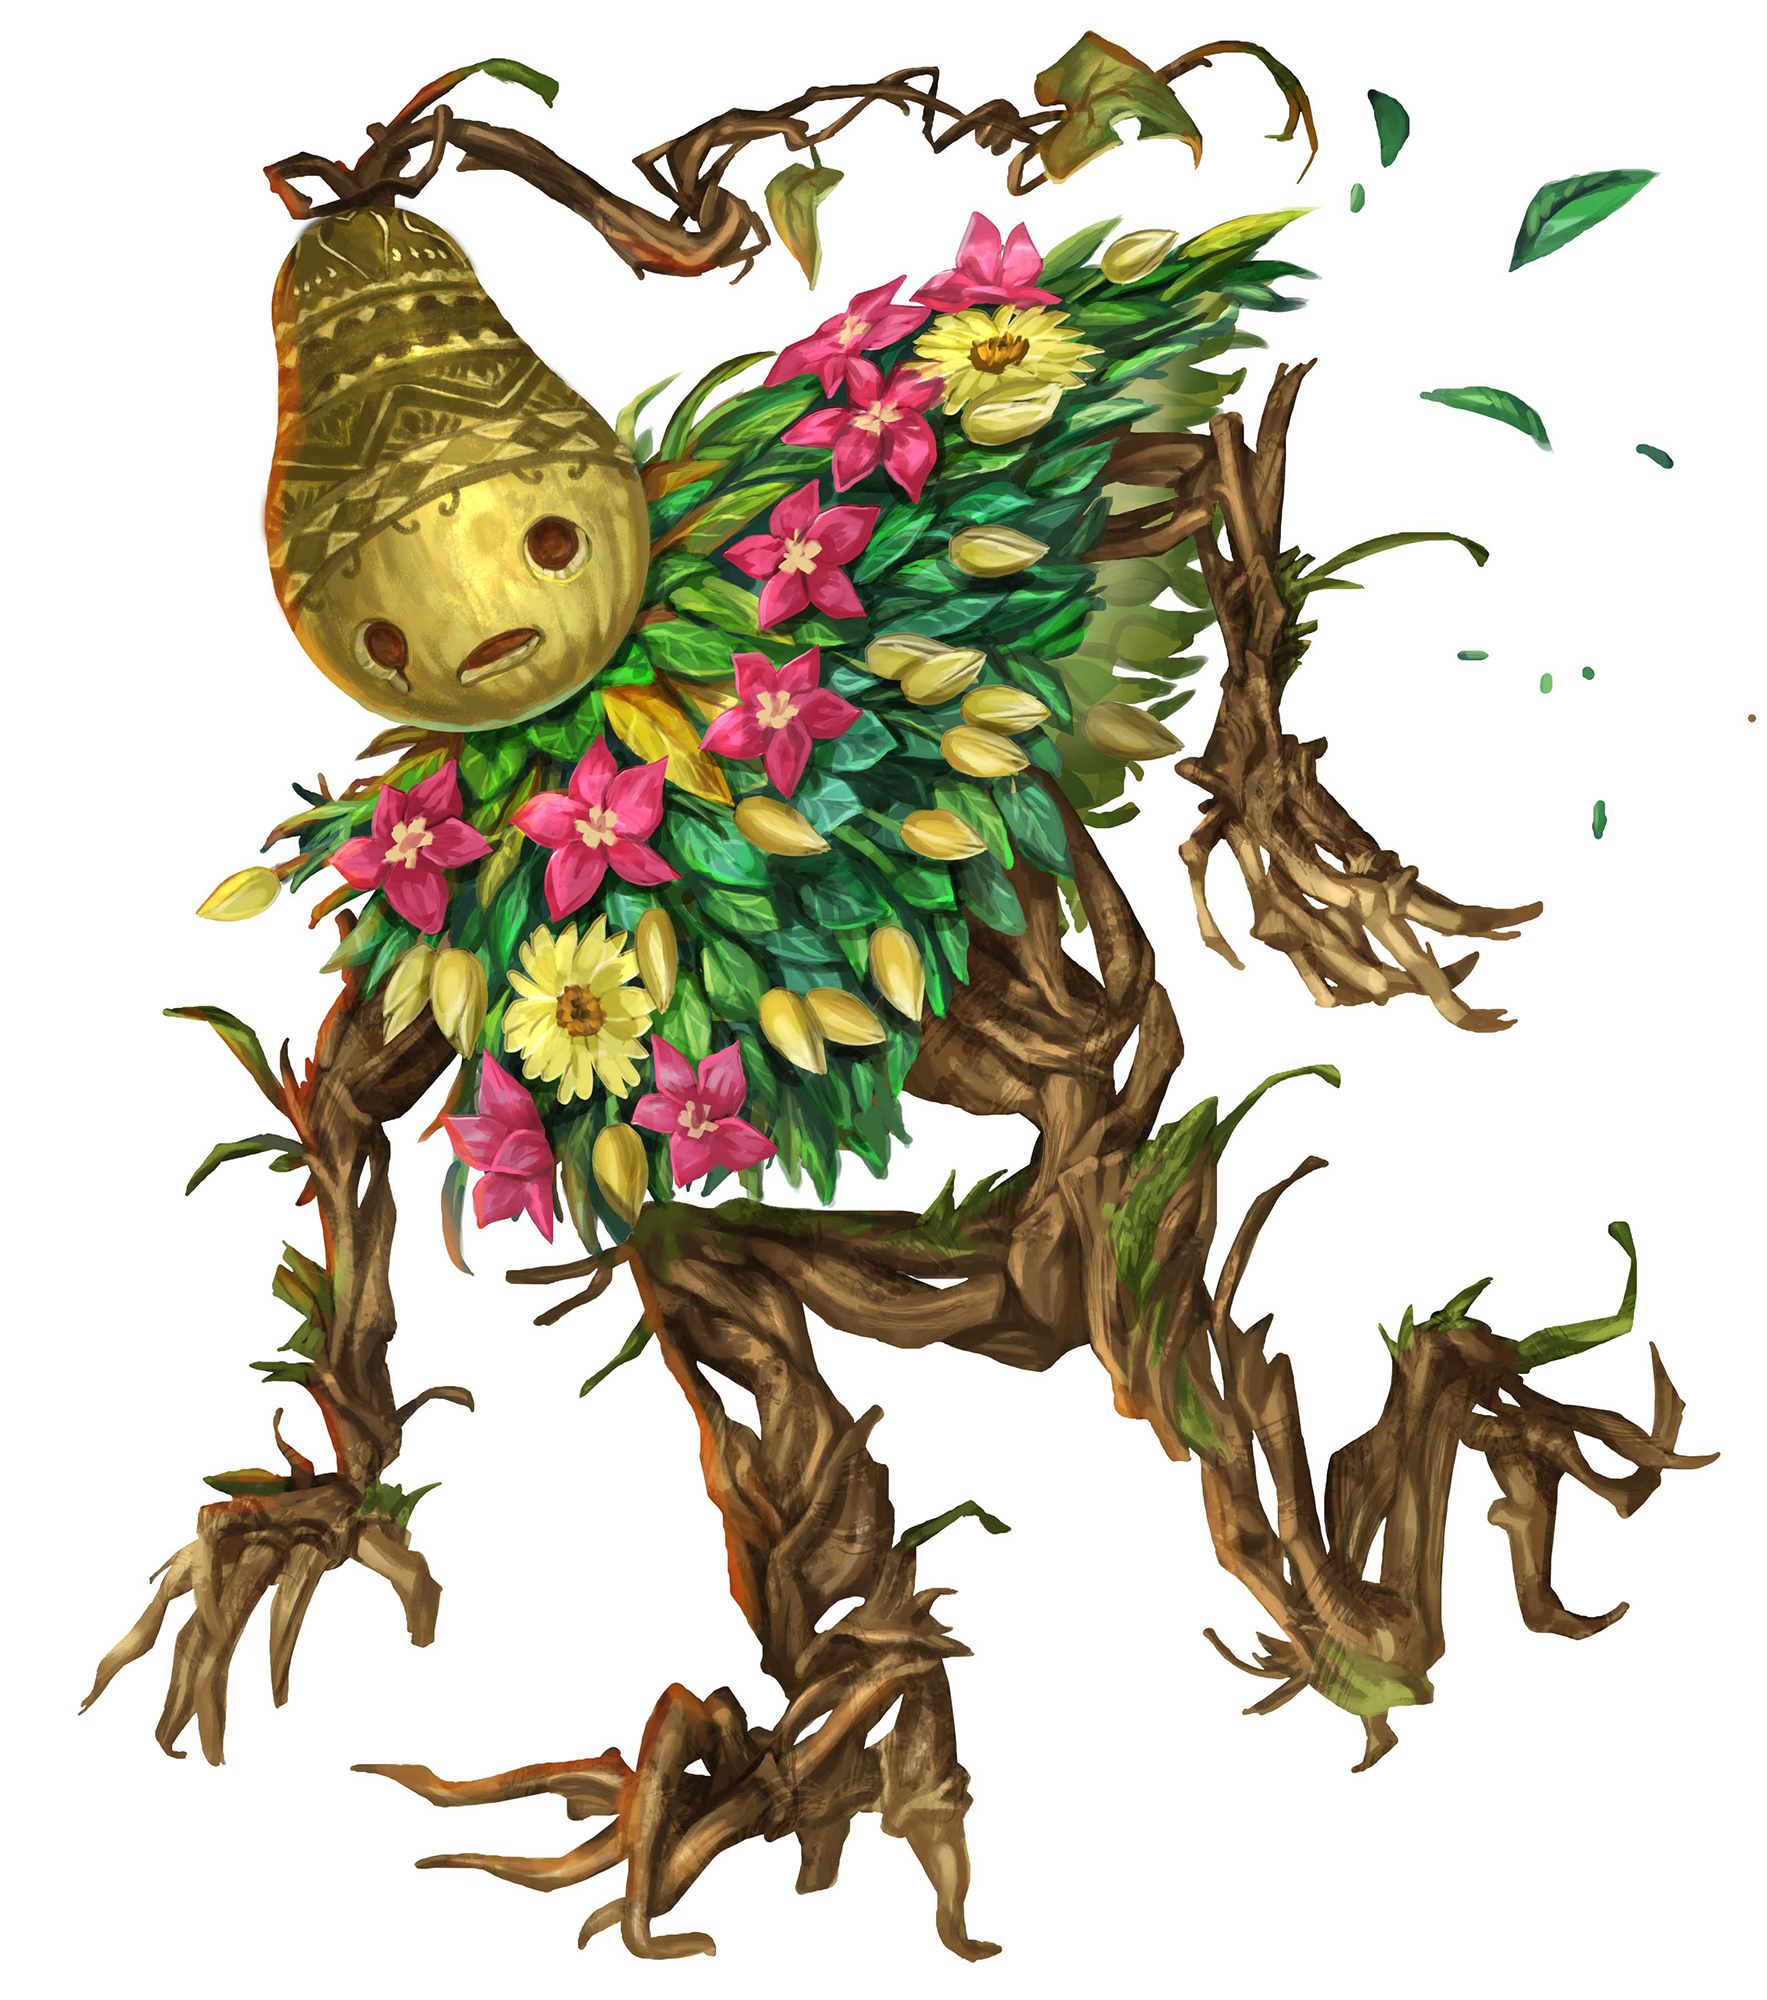 A gourd-headed, vine-bodied leshy wearing a large collar made of leaves and flowers.